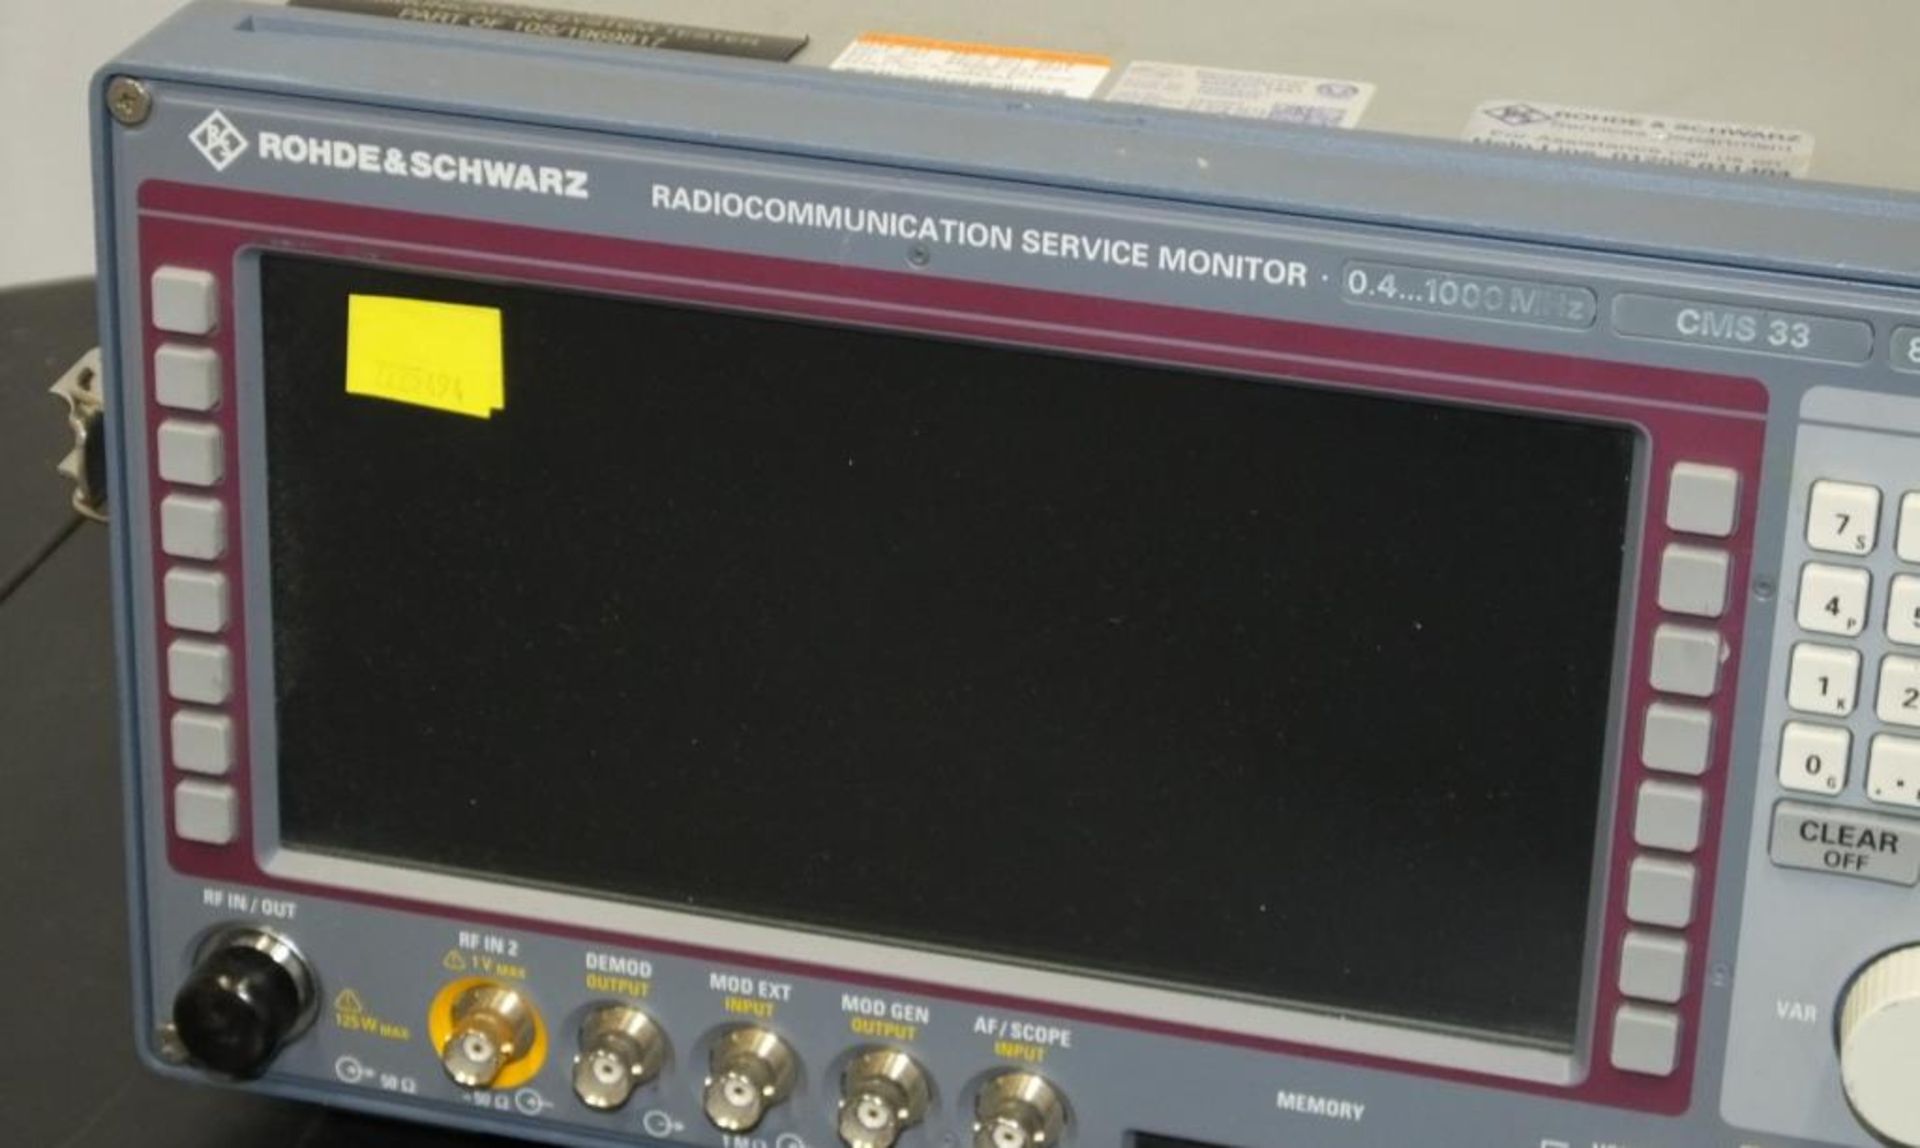 Rohde & Schwarz Radio Communications monitor 0.4 - 1000mhz - CMS33 - 840.0009.34, antenna base in co - Image 3 of 9